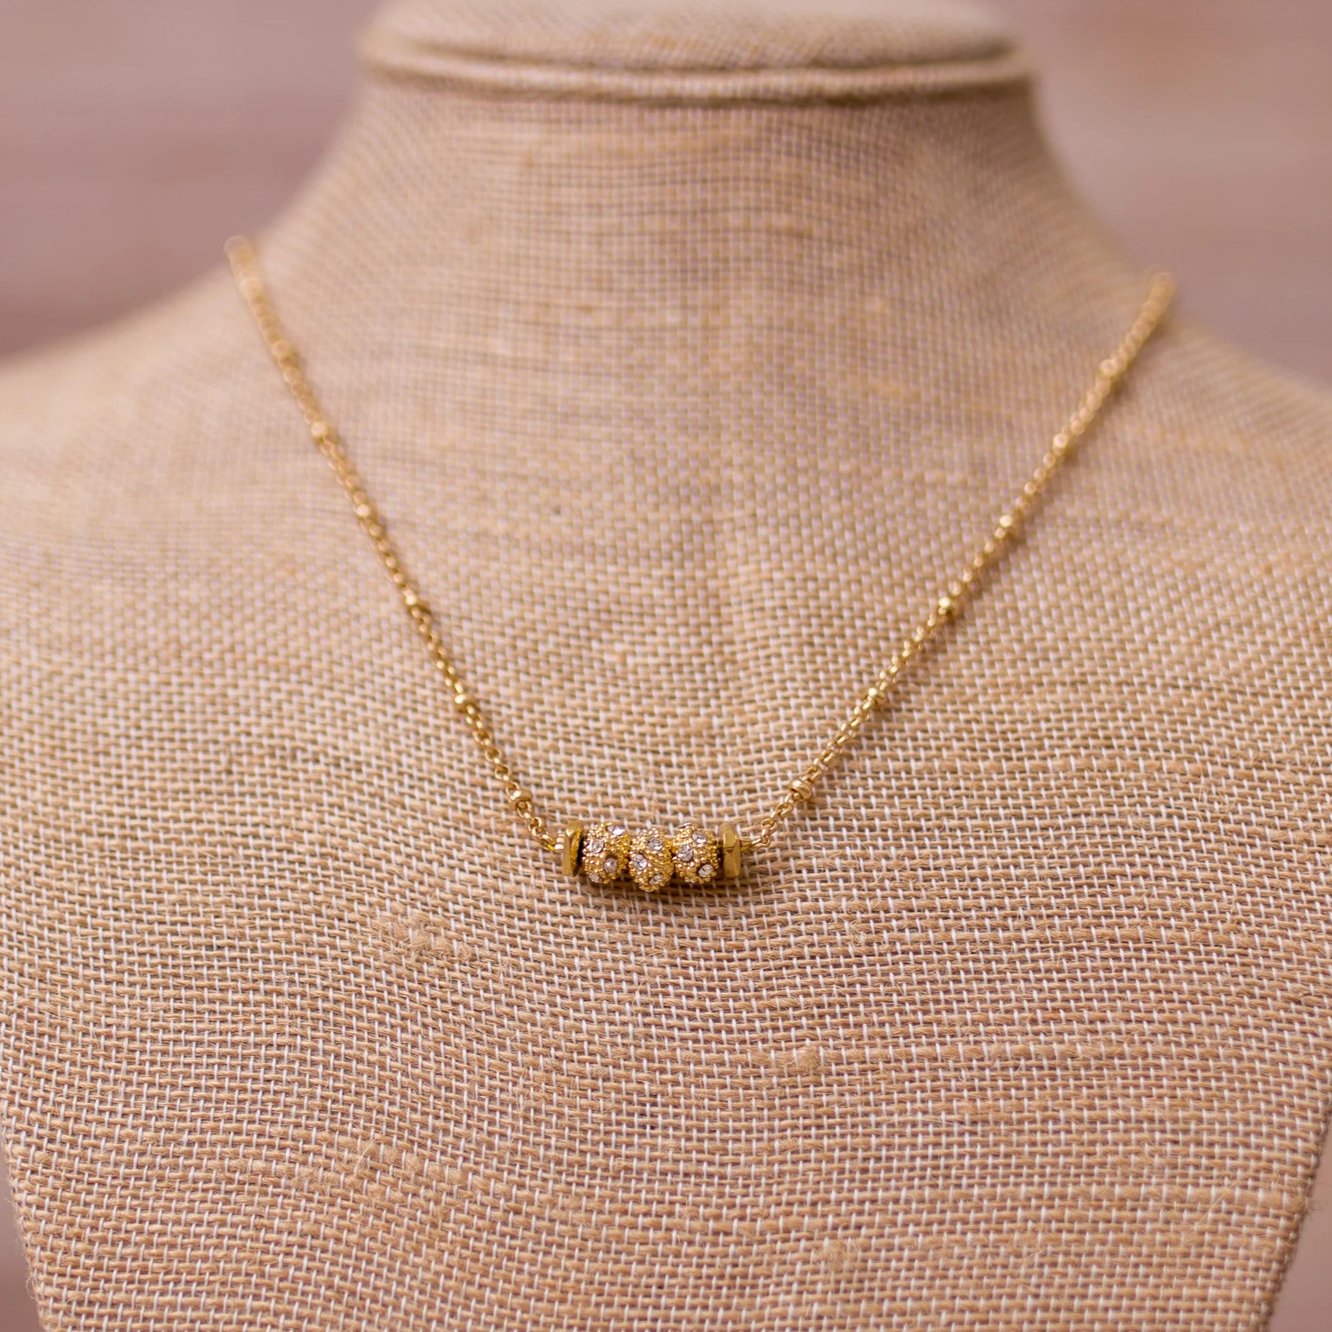 Petite Necklace with Pave Beads - handmade